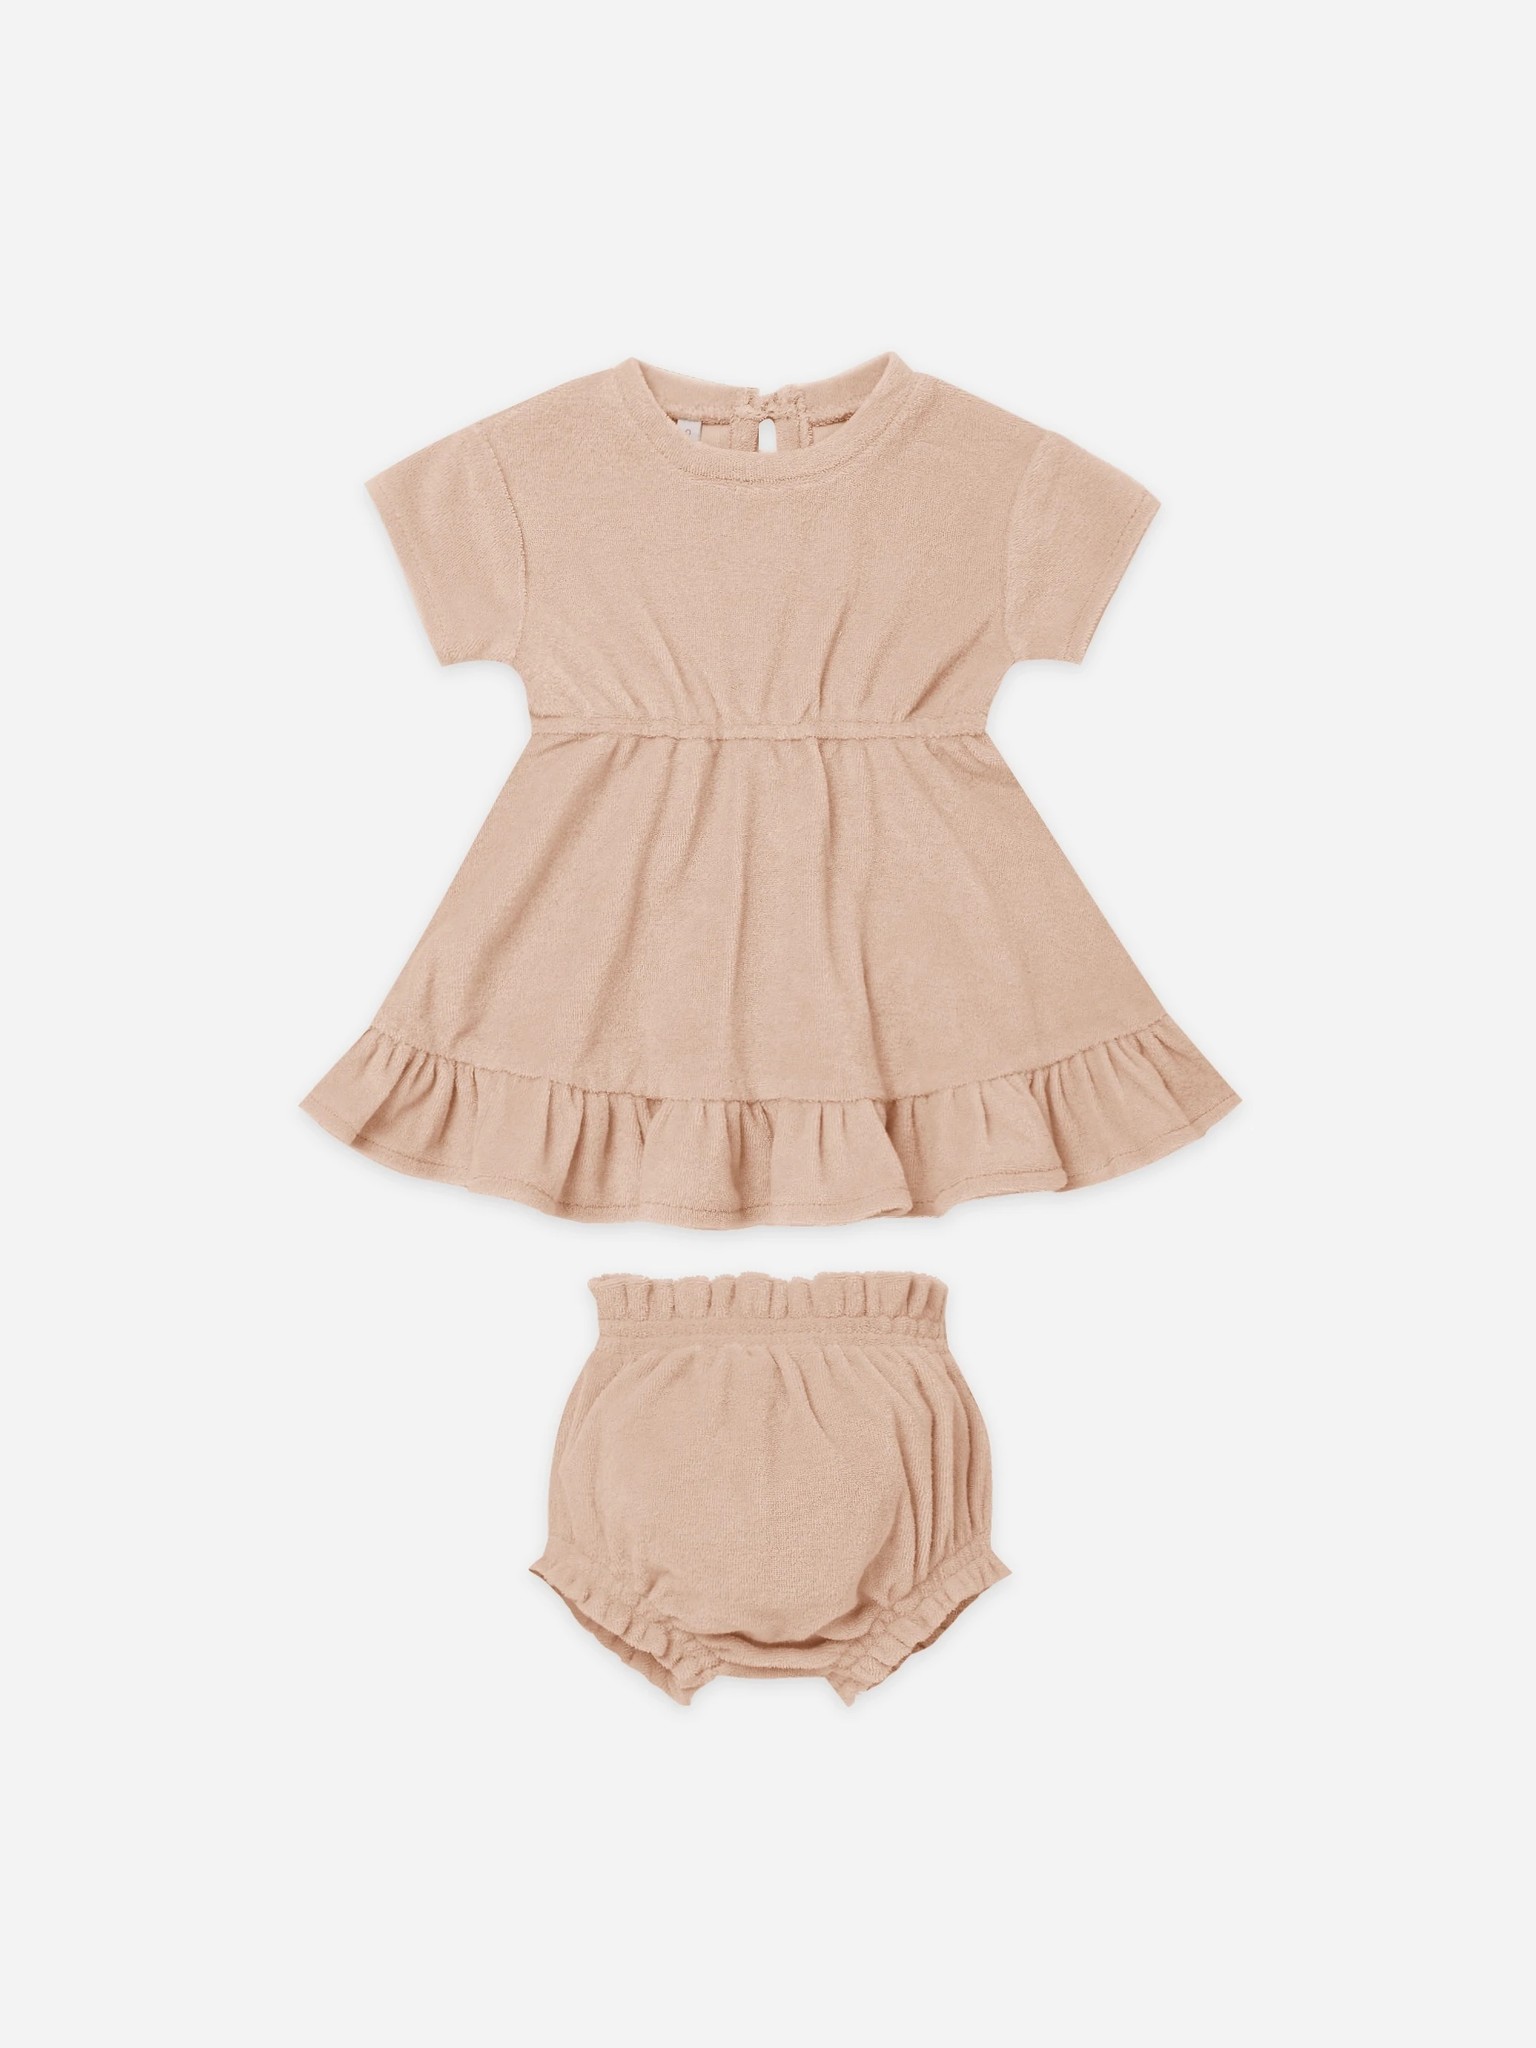 Quincy Mae Quincy Mae Terry Dress Set